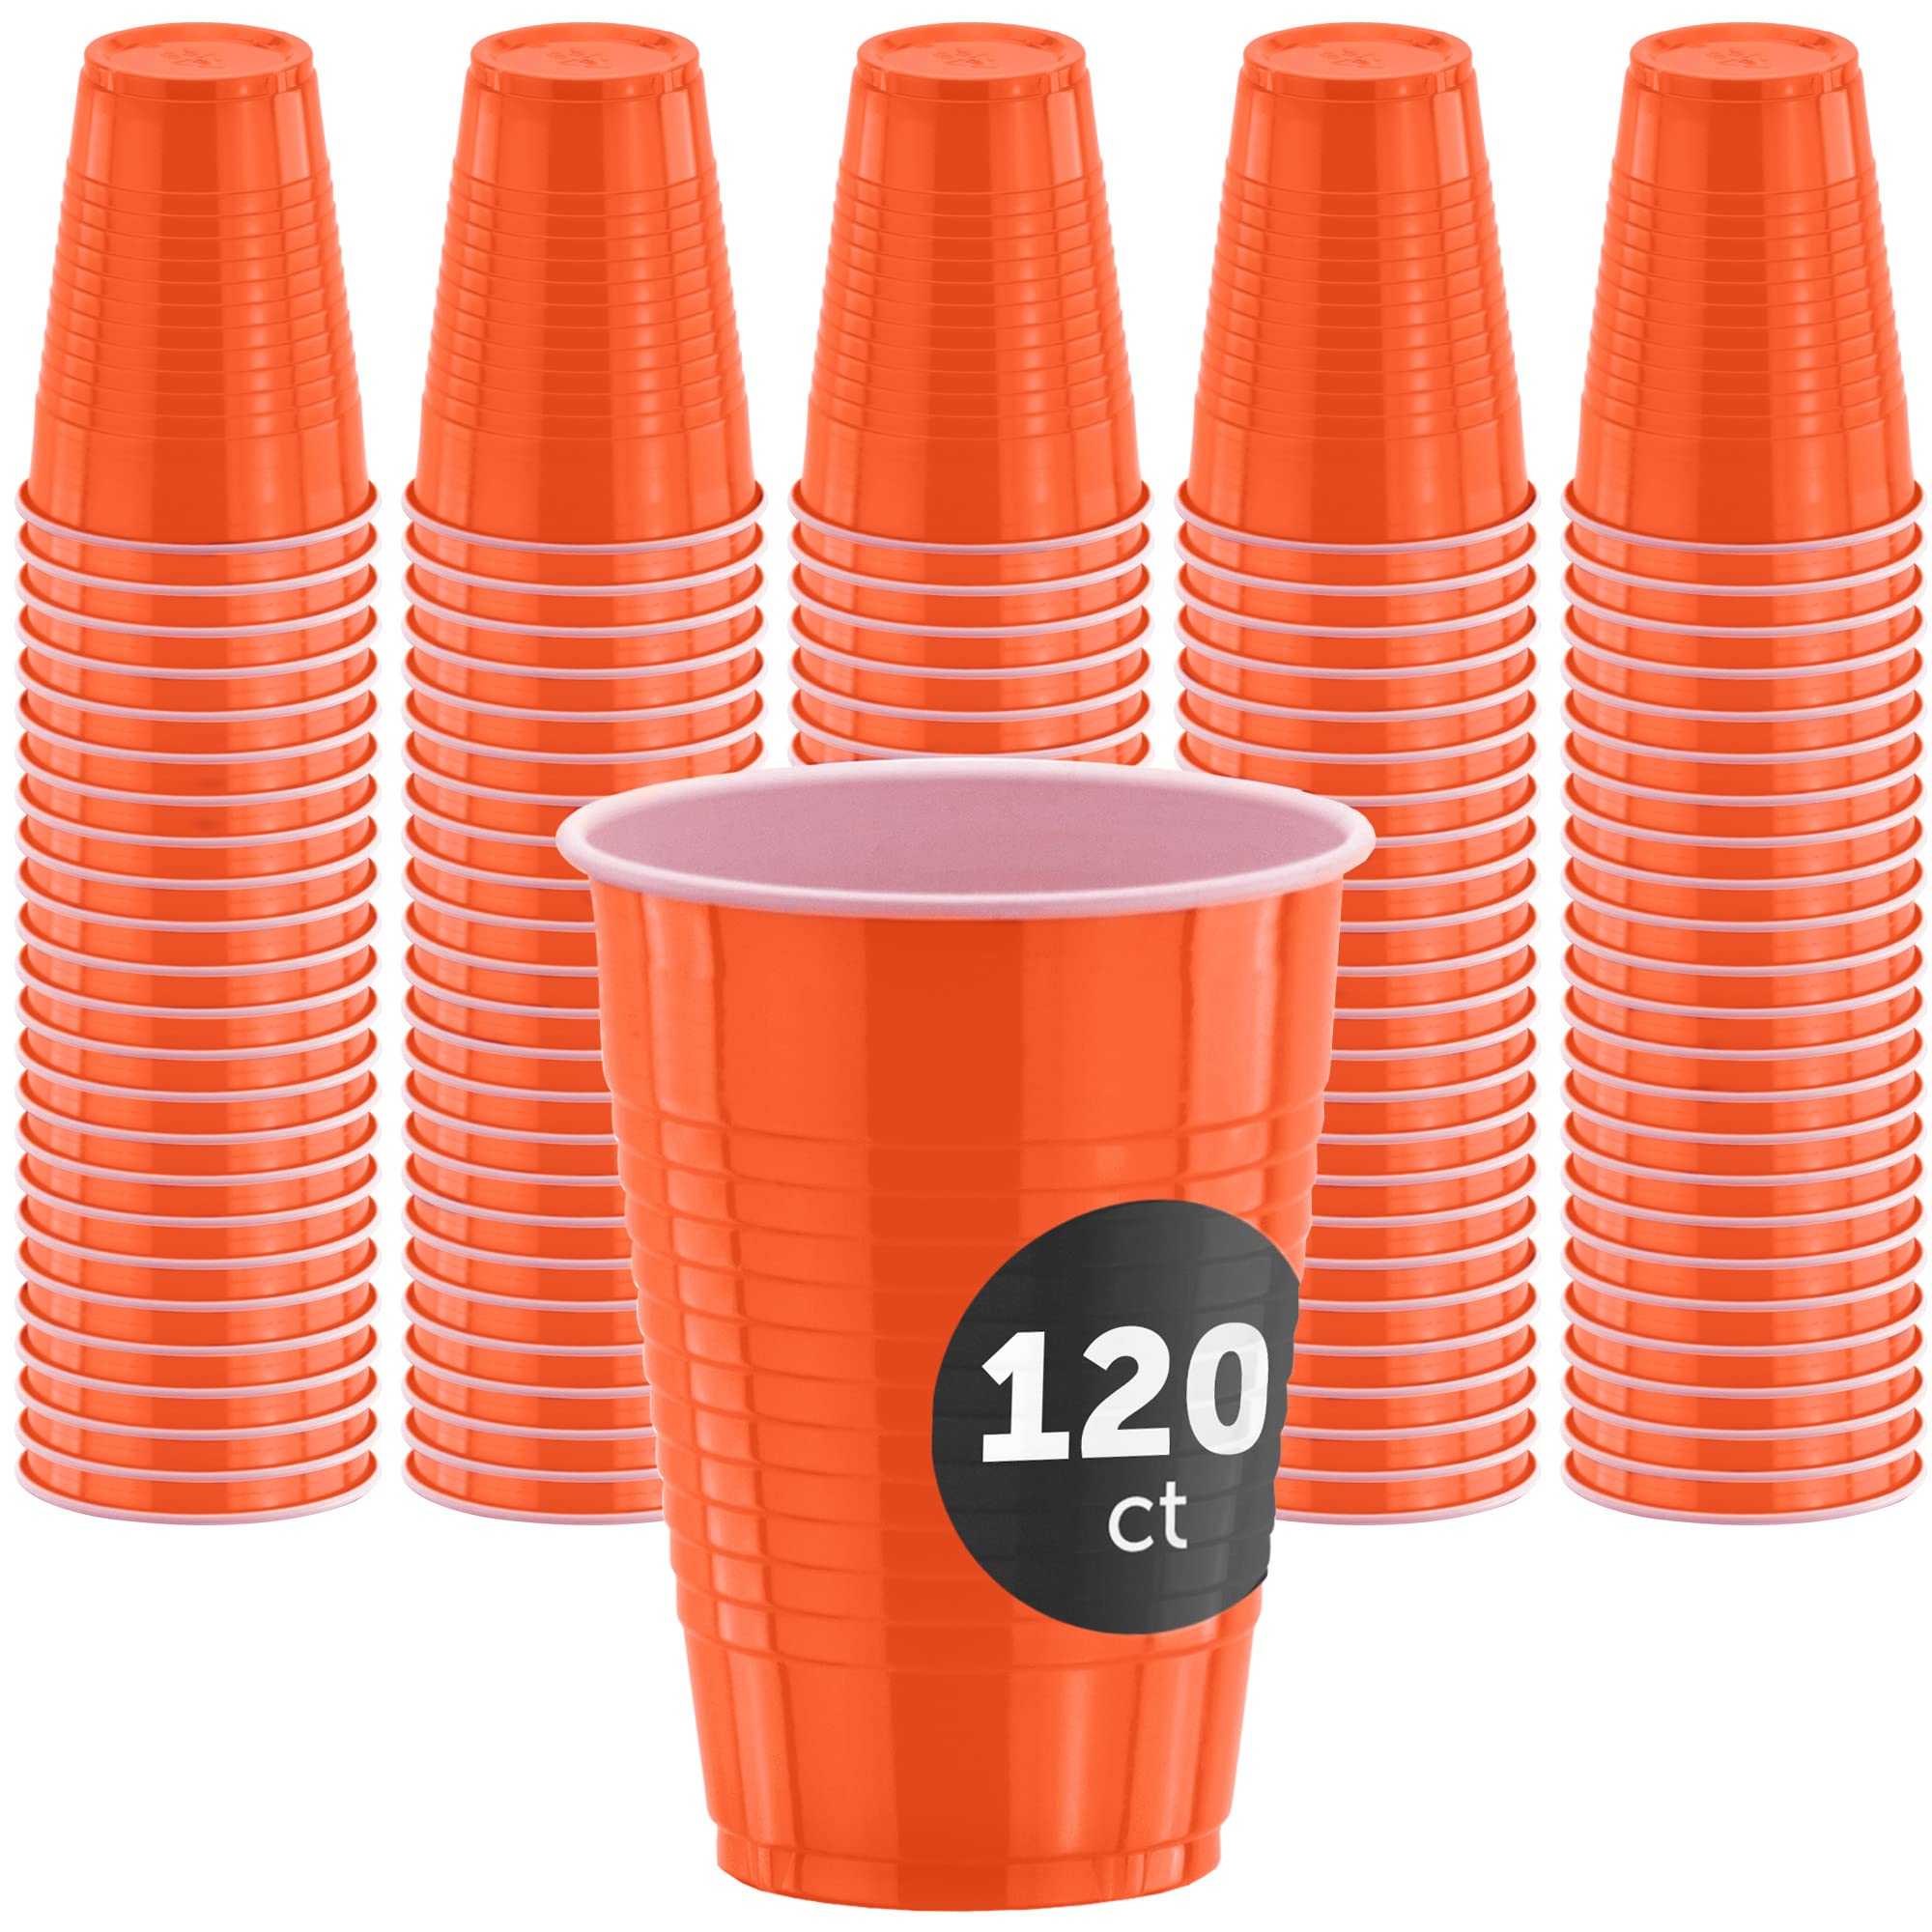 12 OZ Plastic Red Cups Value Pack Of Disposable Party Cups Party